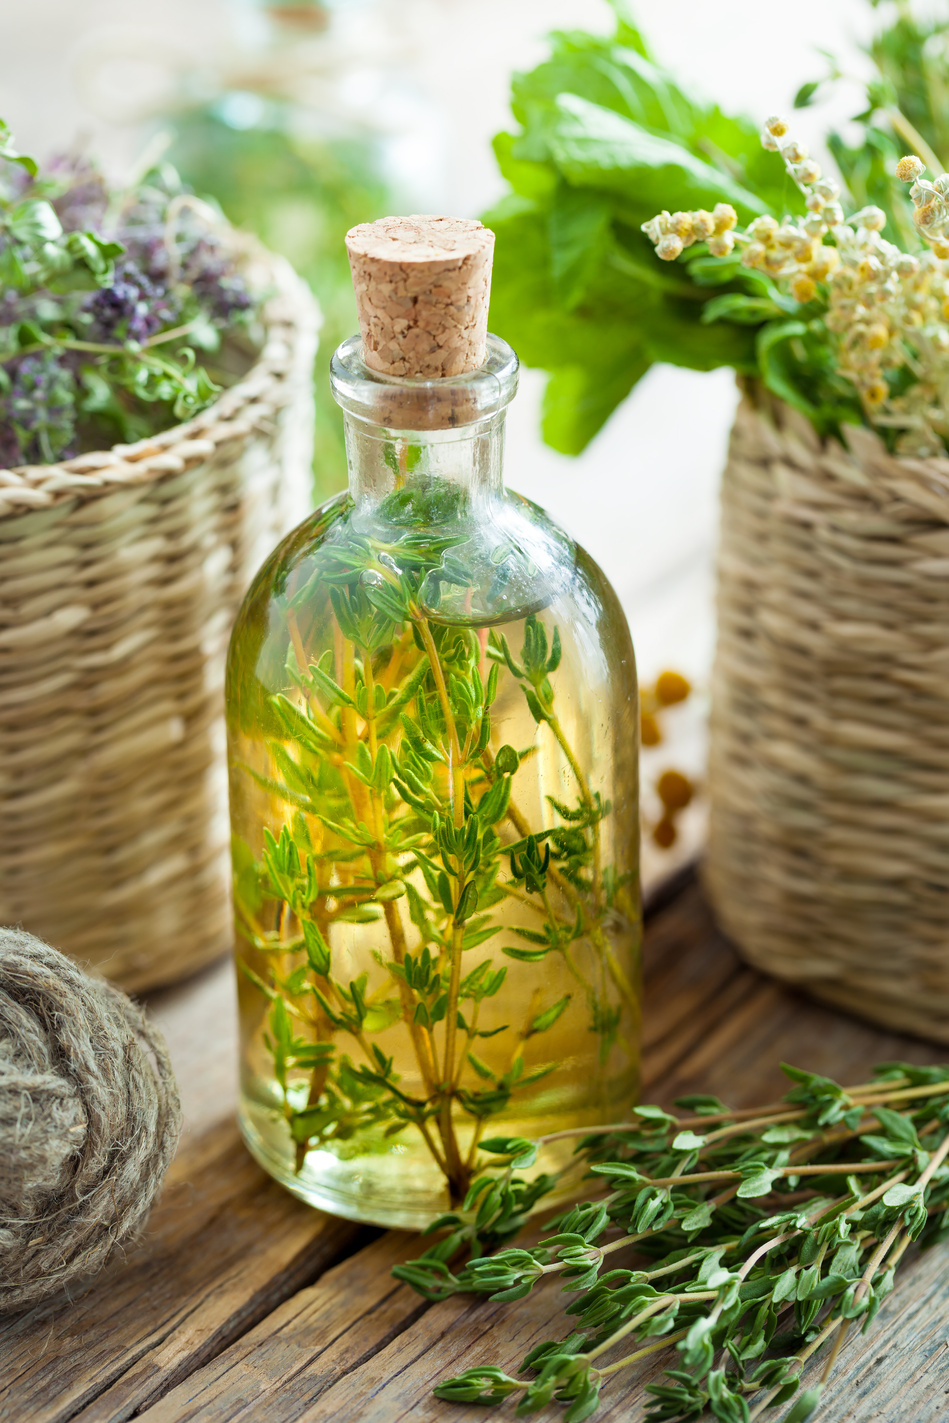 Thyme essential oil or infusion and basket of healing herbs.